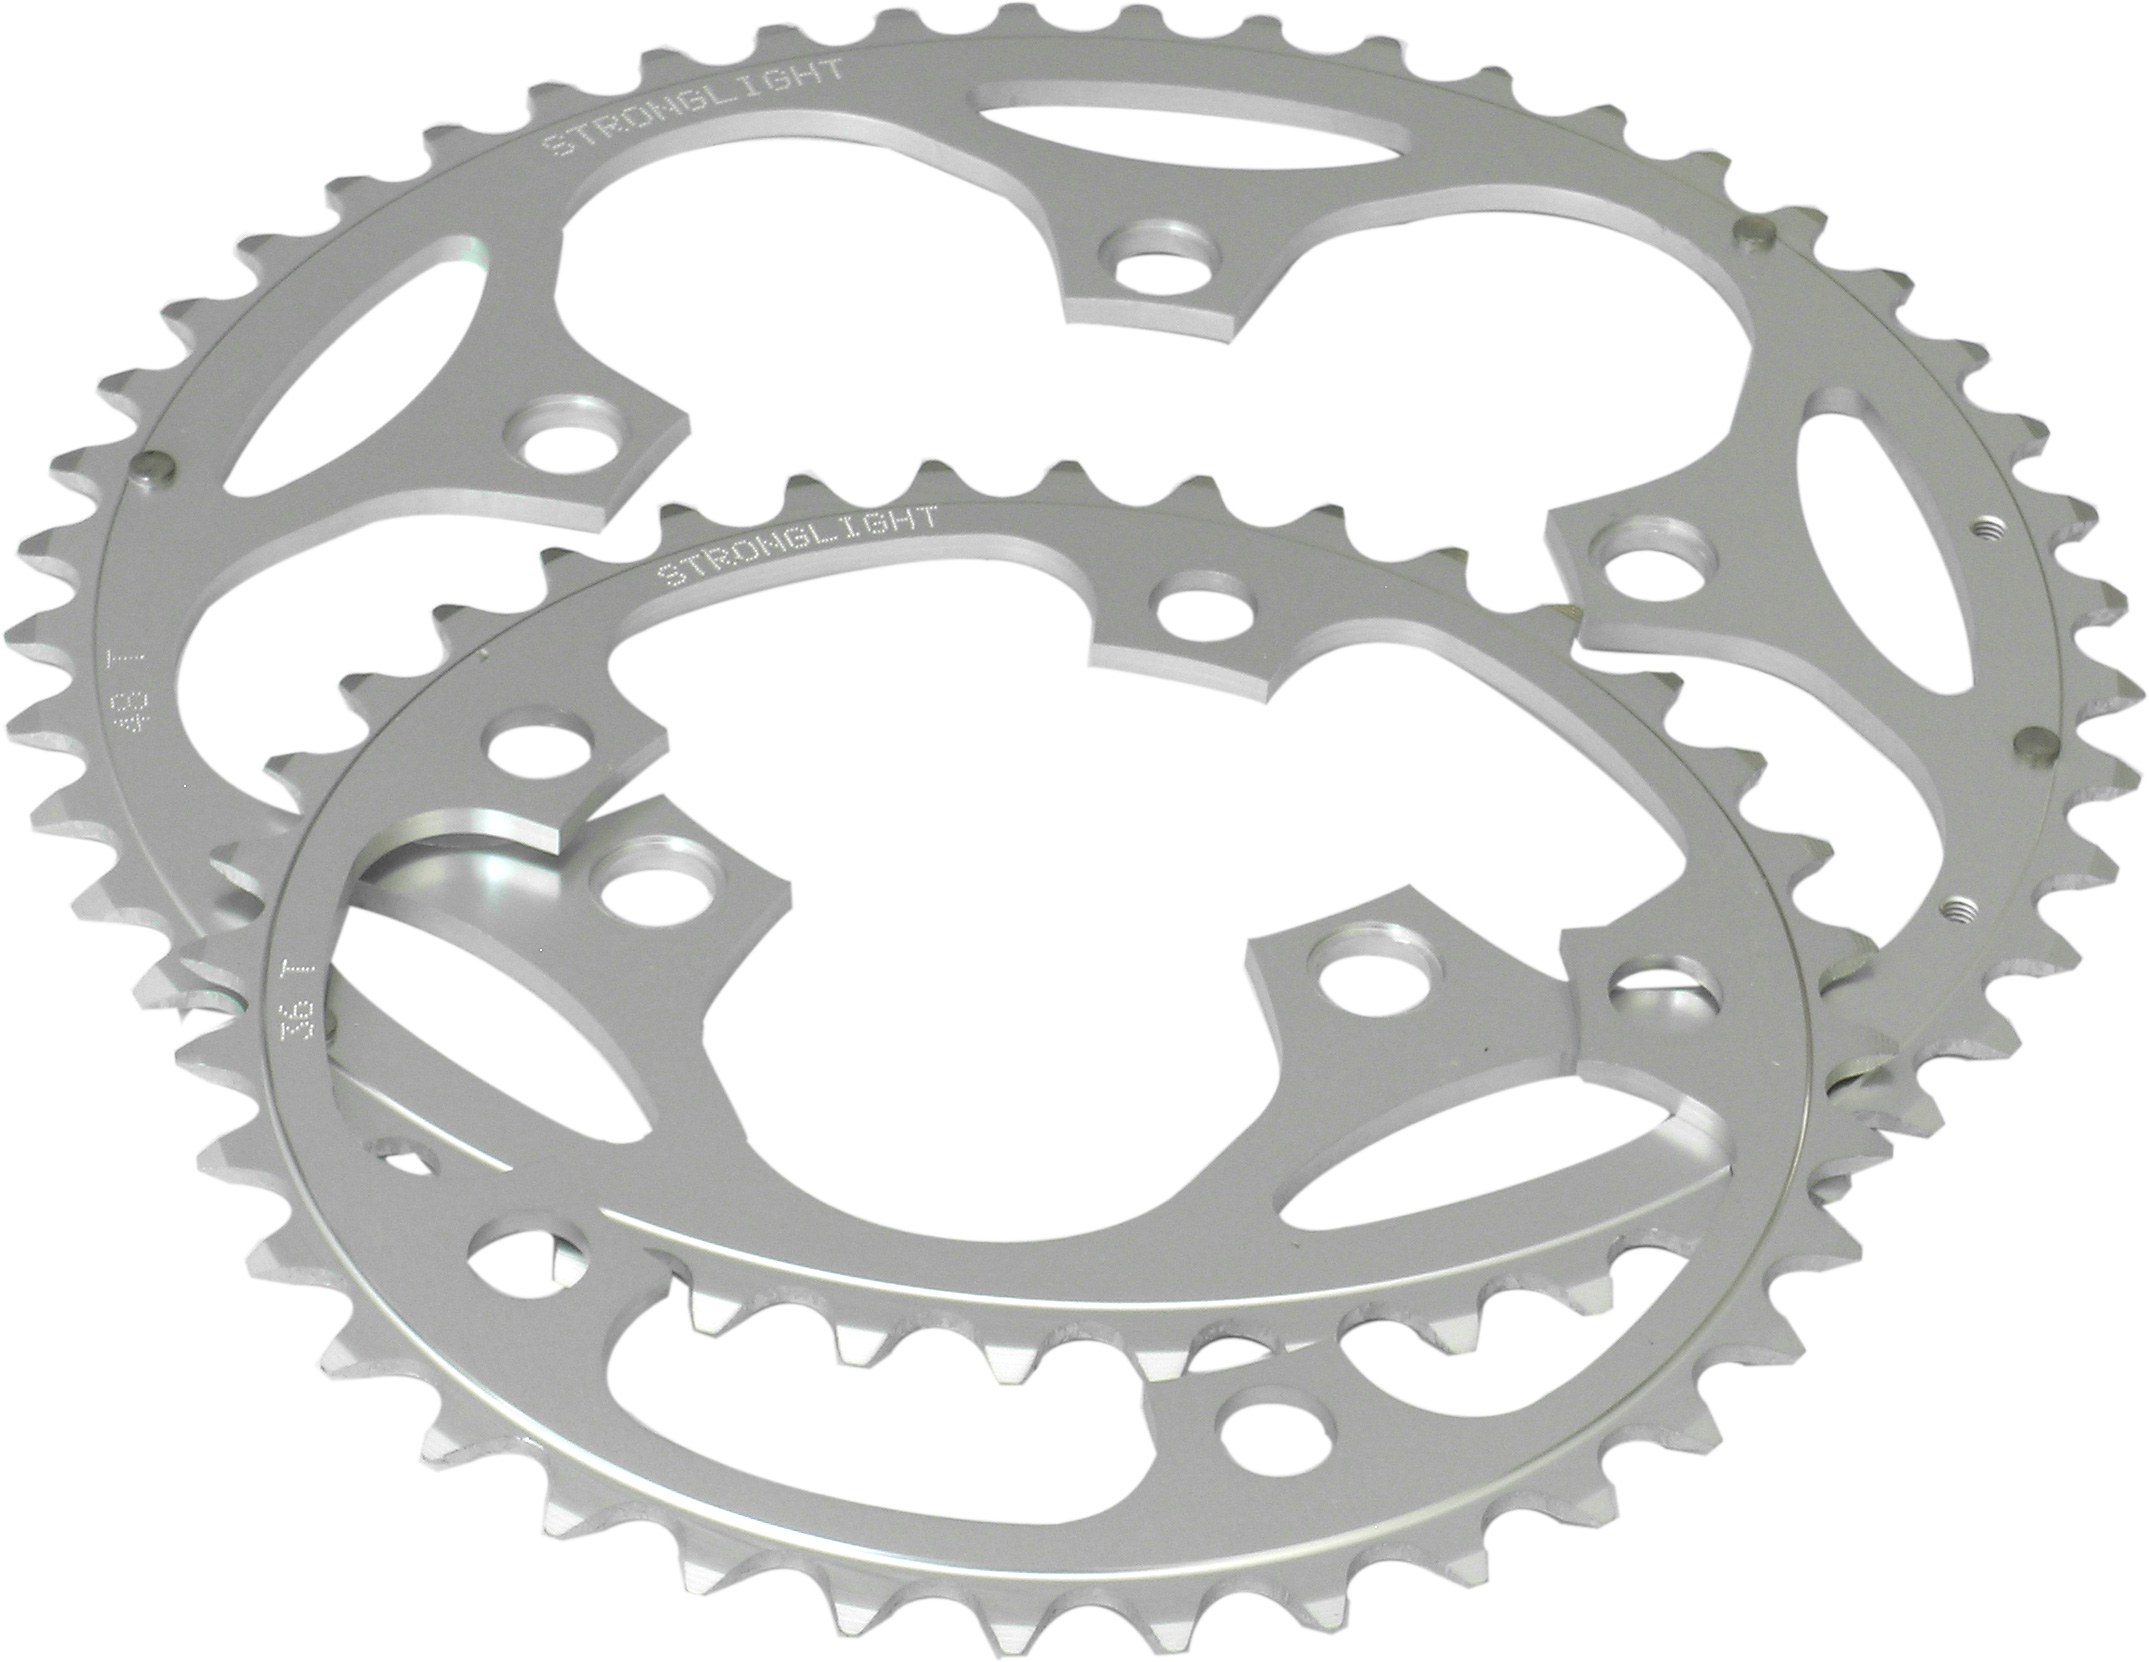 RD11050S Stronglight 50T Silver 5-Arm Alloy Chainring